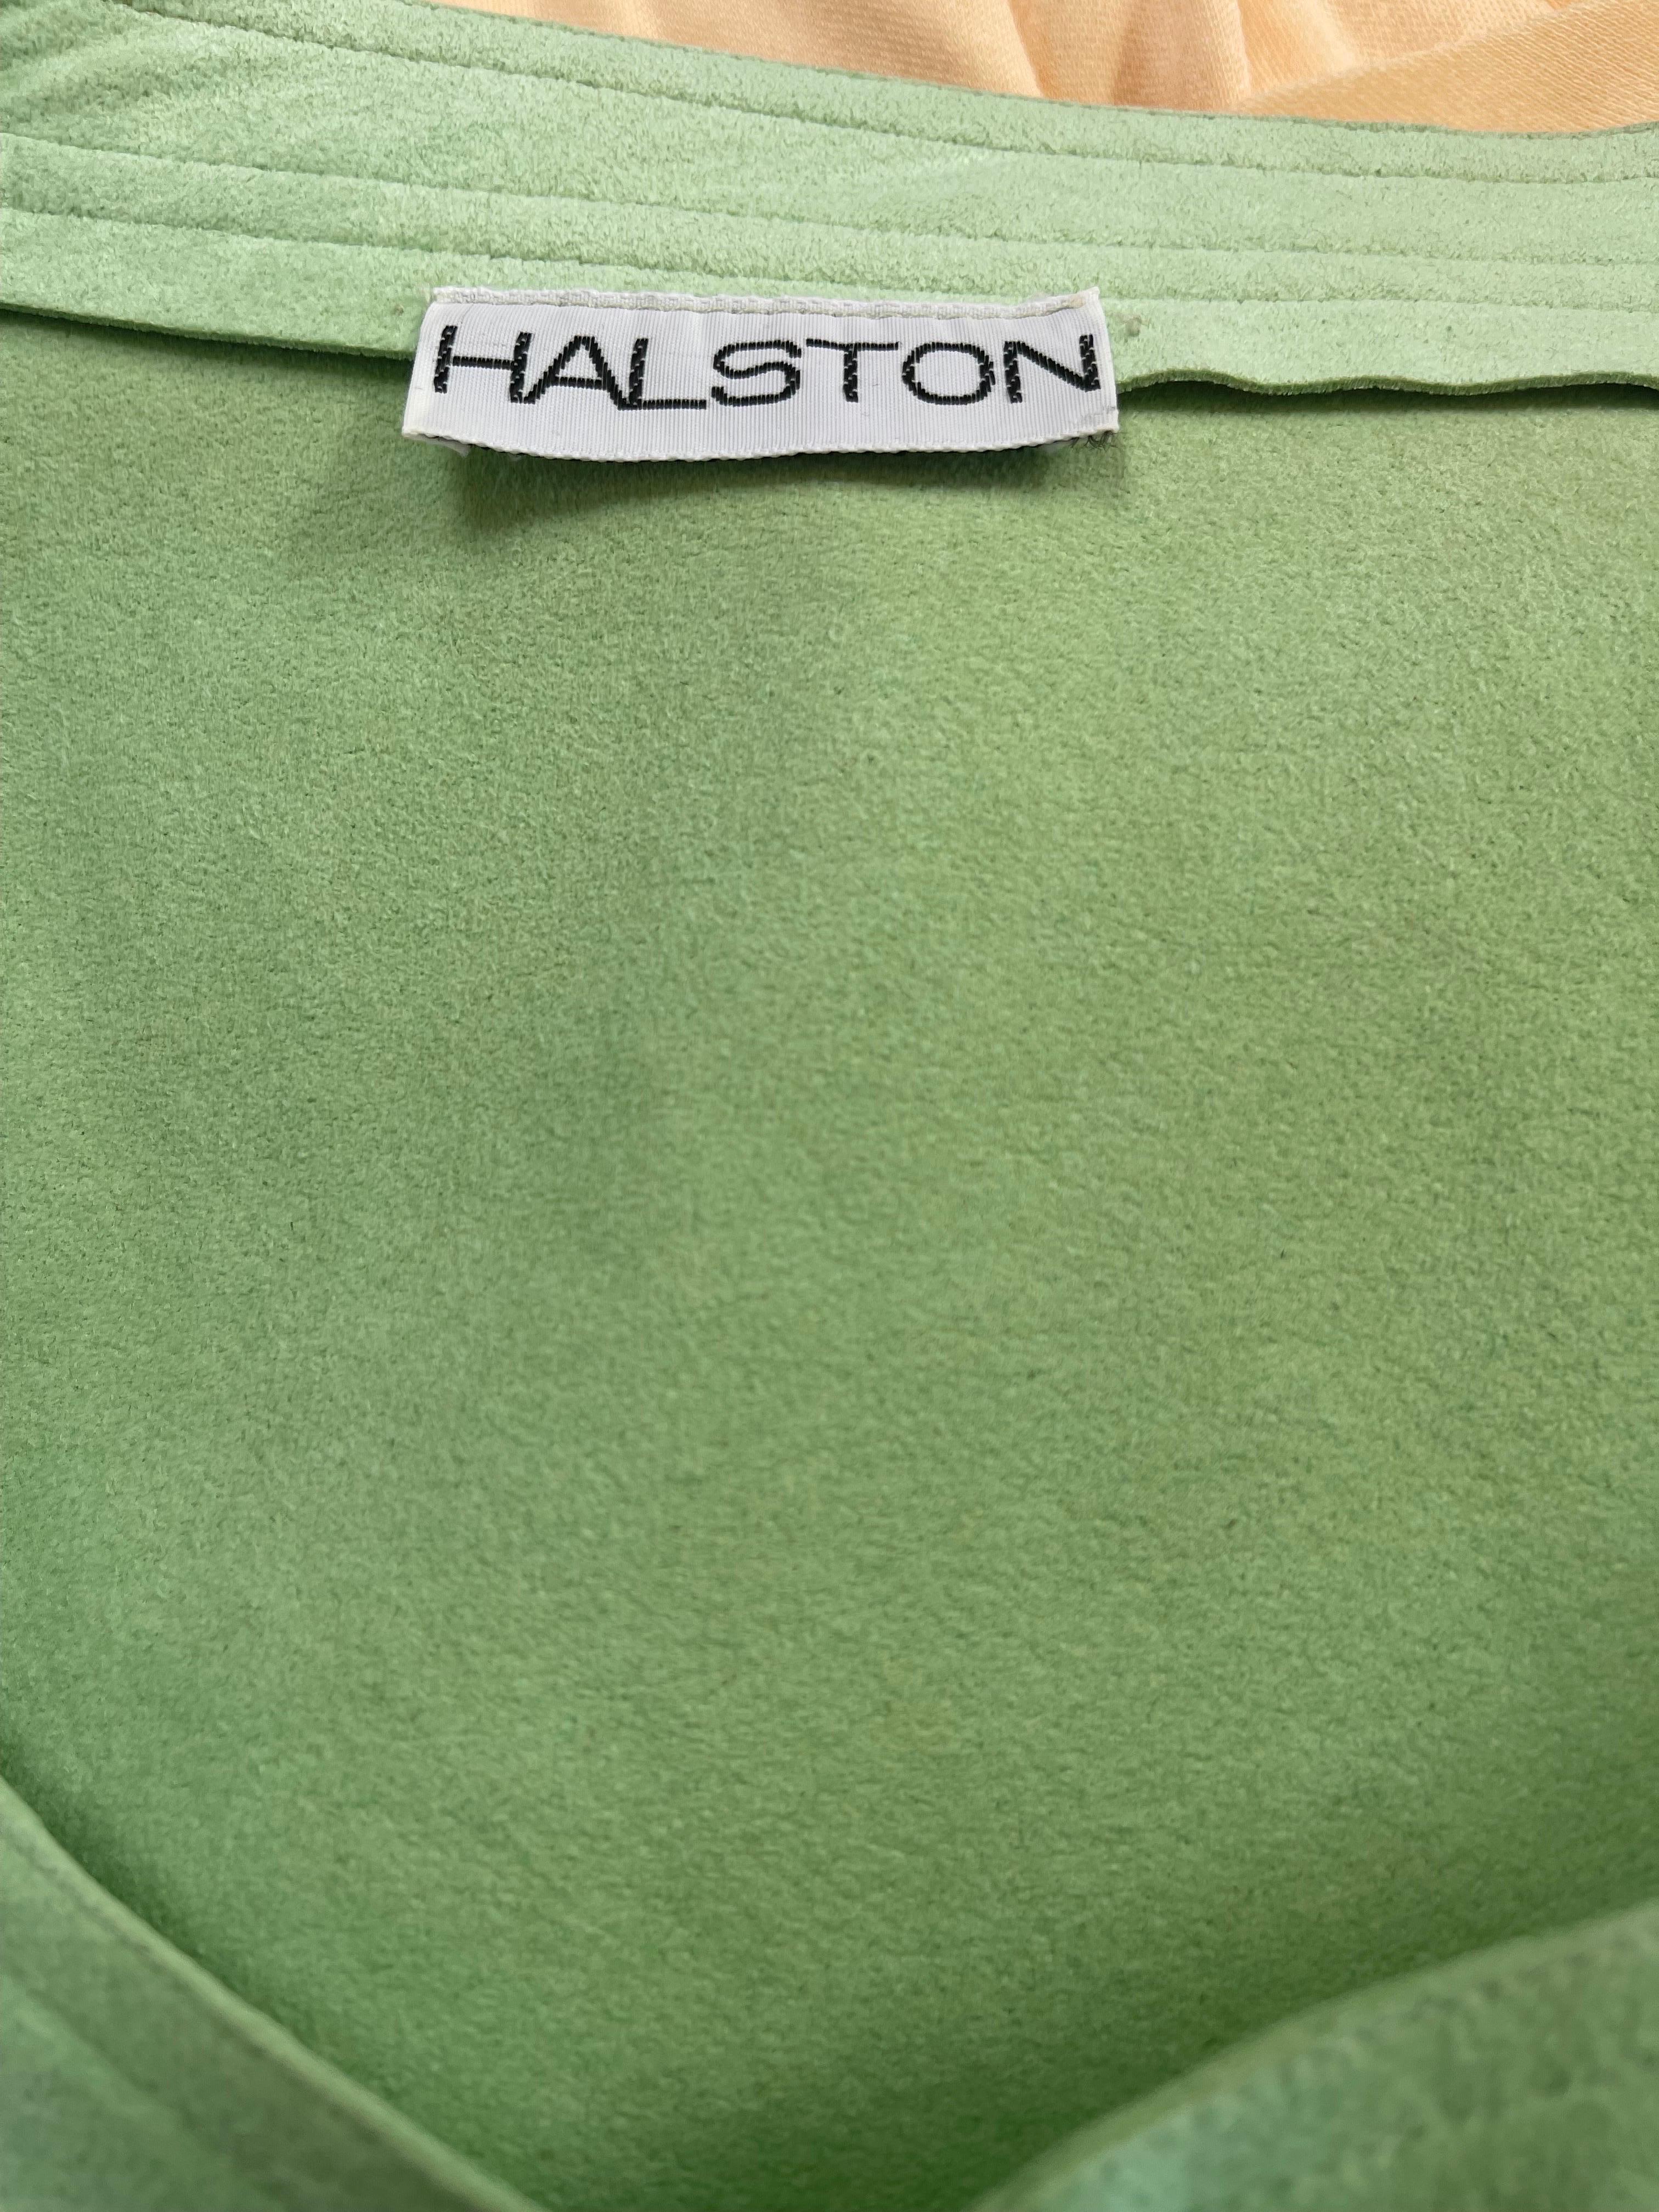 Chic 1970s HALSTON pistachio green ultra suede short sleeve belted shirt dress ! The perfect color green on the softest most luxurious ultra suede that Halston was famed for. This is actually machine washable. Buttons up the front, with pockets at